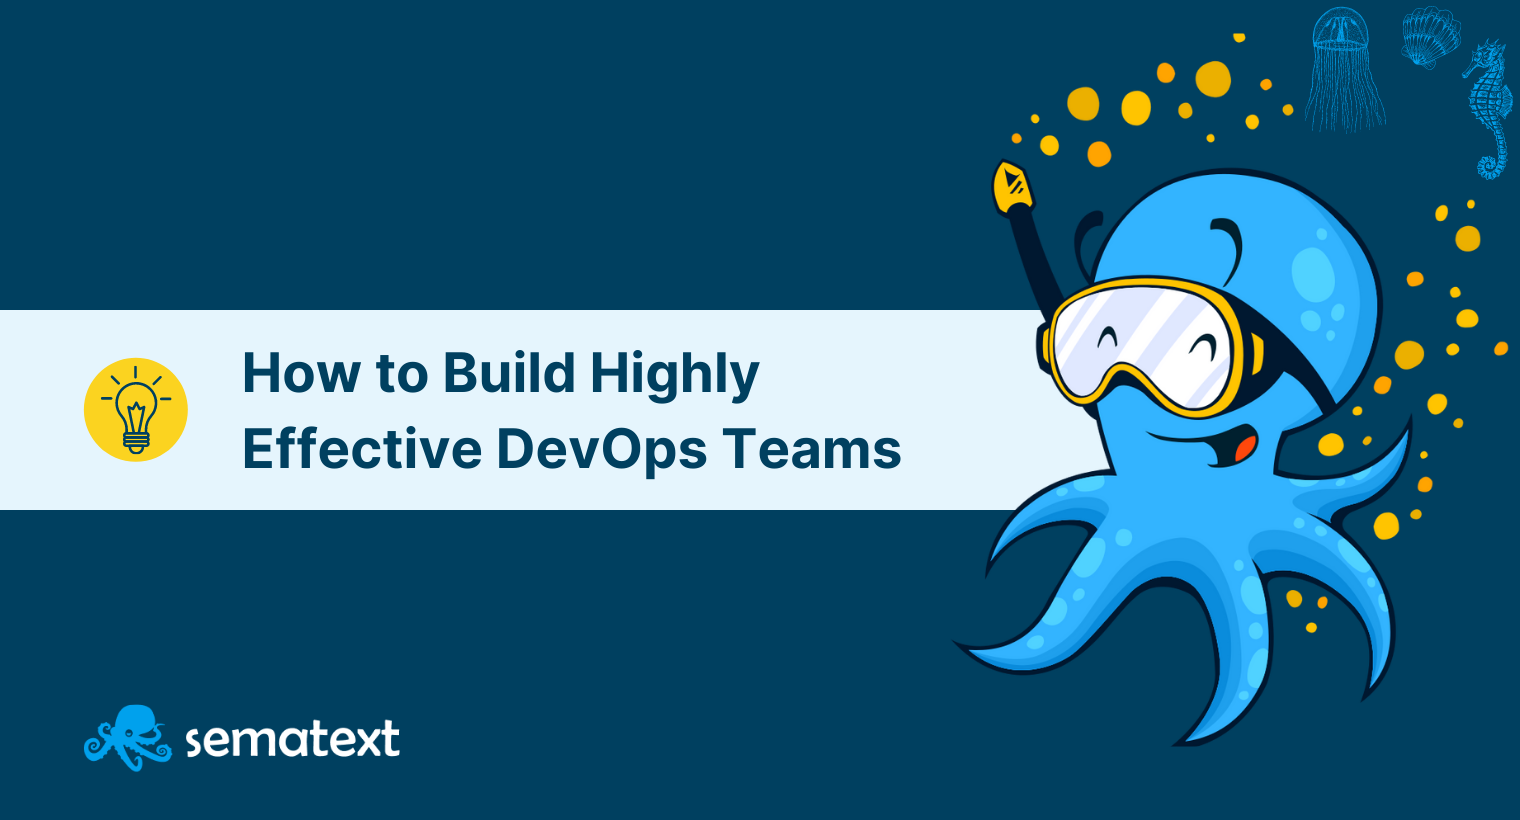 Building Highly Effective DevOps Teams: Structure, Roles & Responsibilities You Need to Succeed